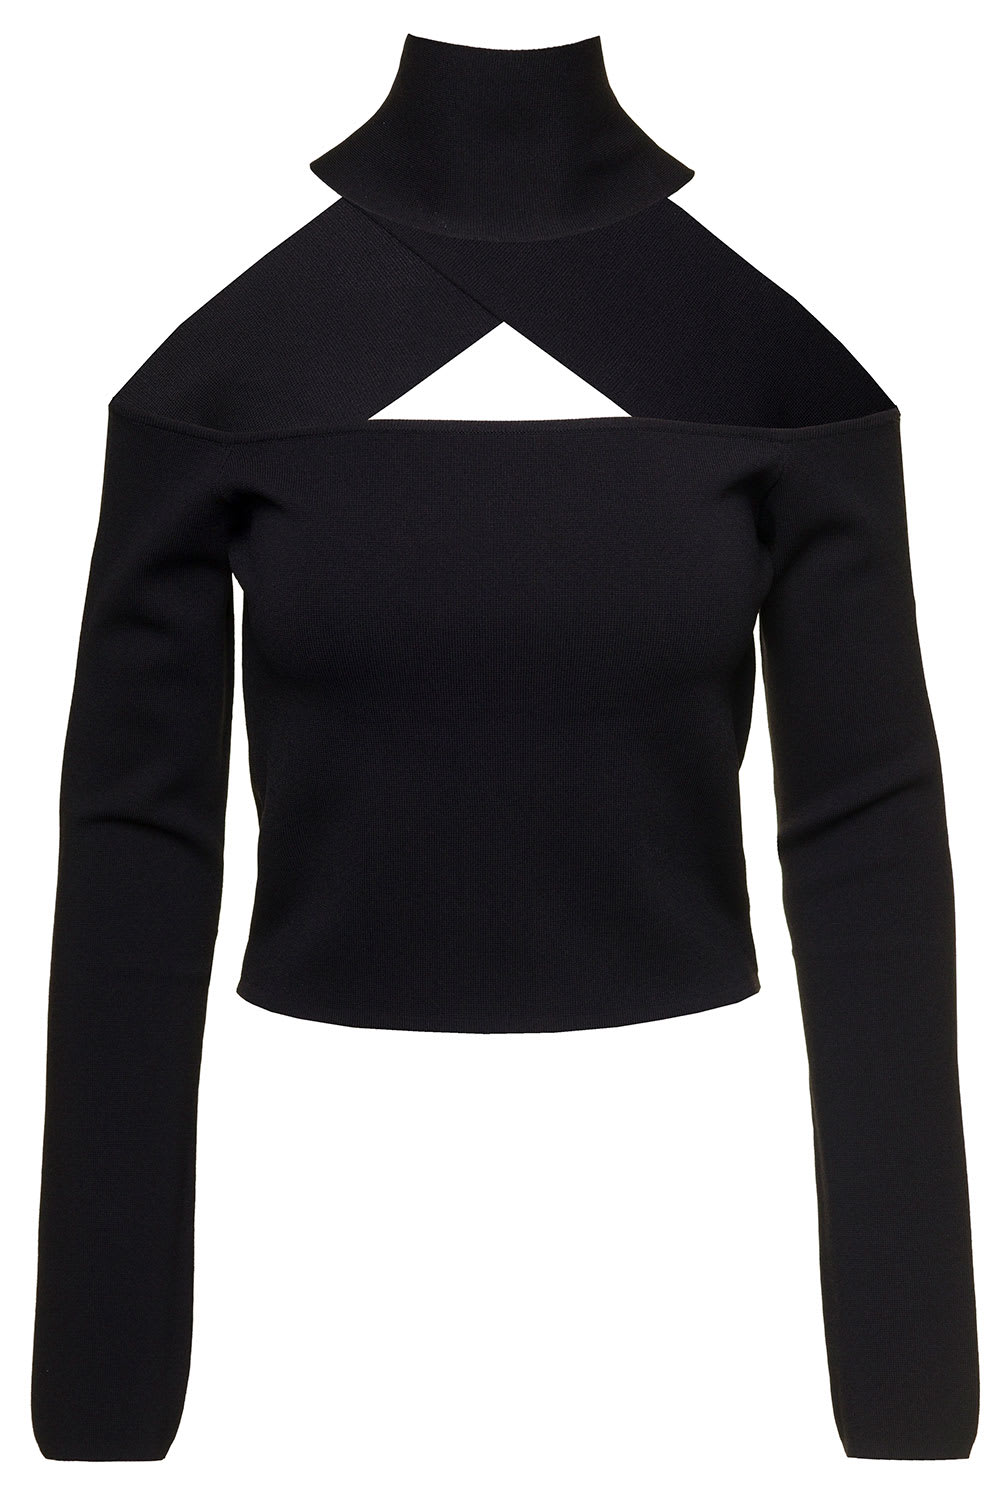 GAUGE81 molins Black Top With Choker Detail And Extra Long Sleeves In Rayon Blend Woman Gauge81